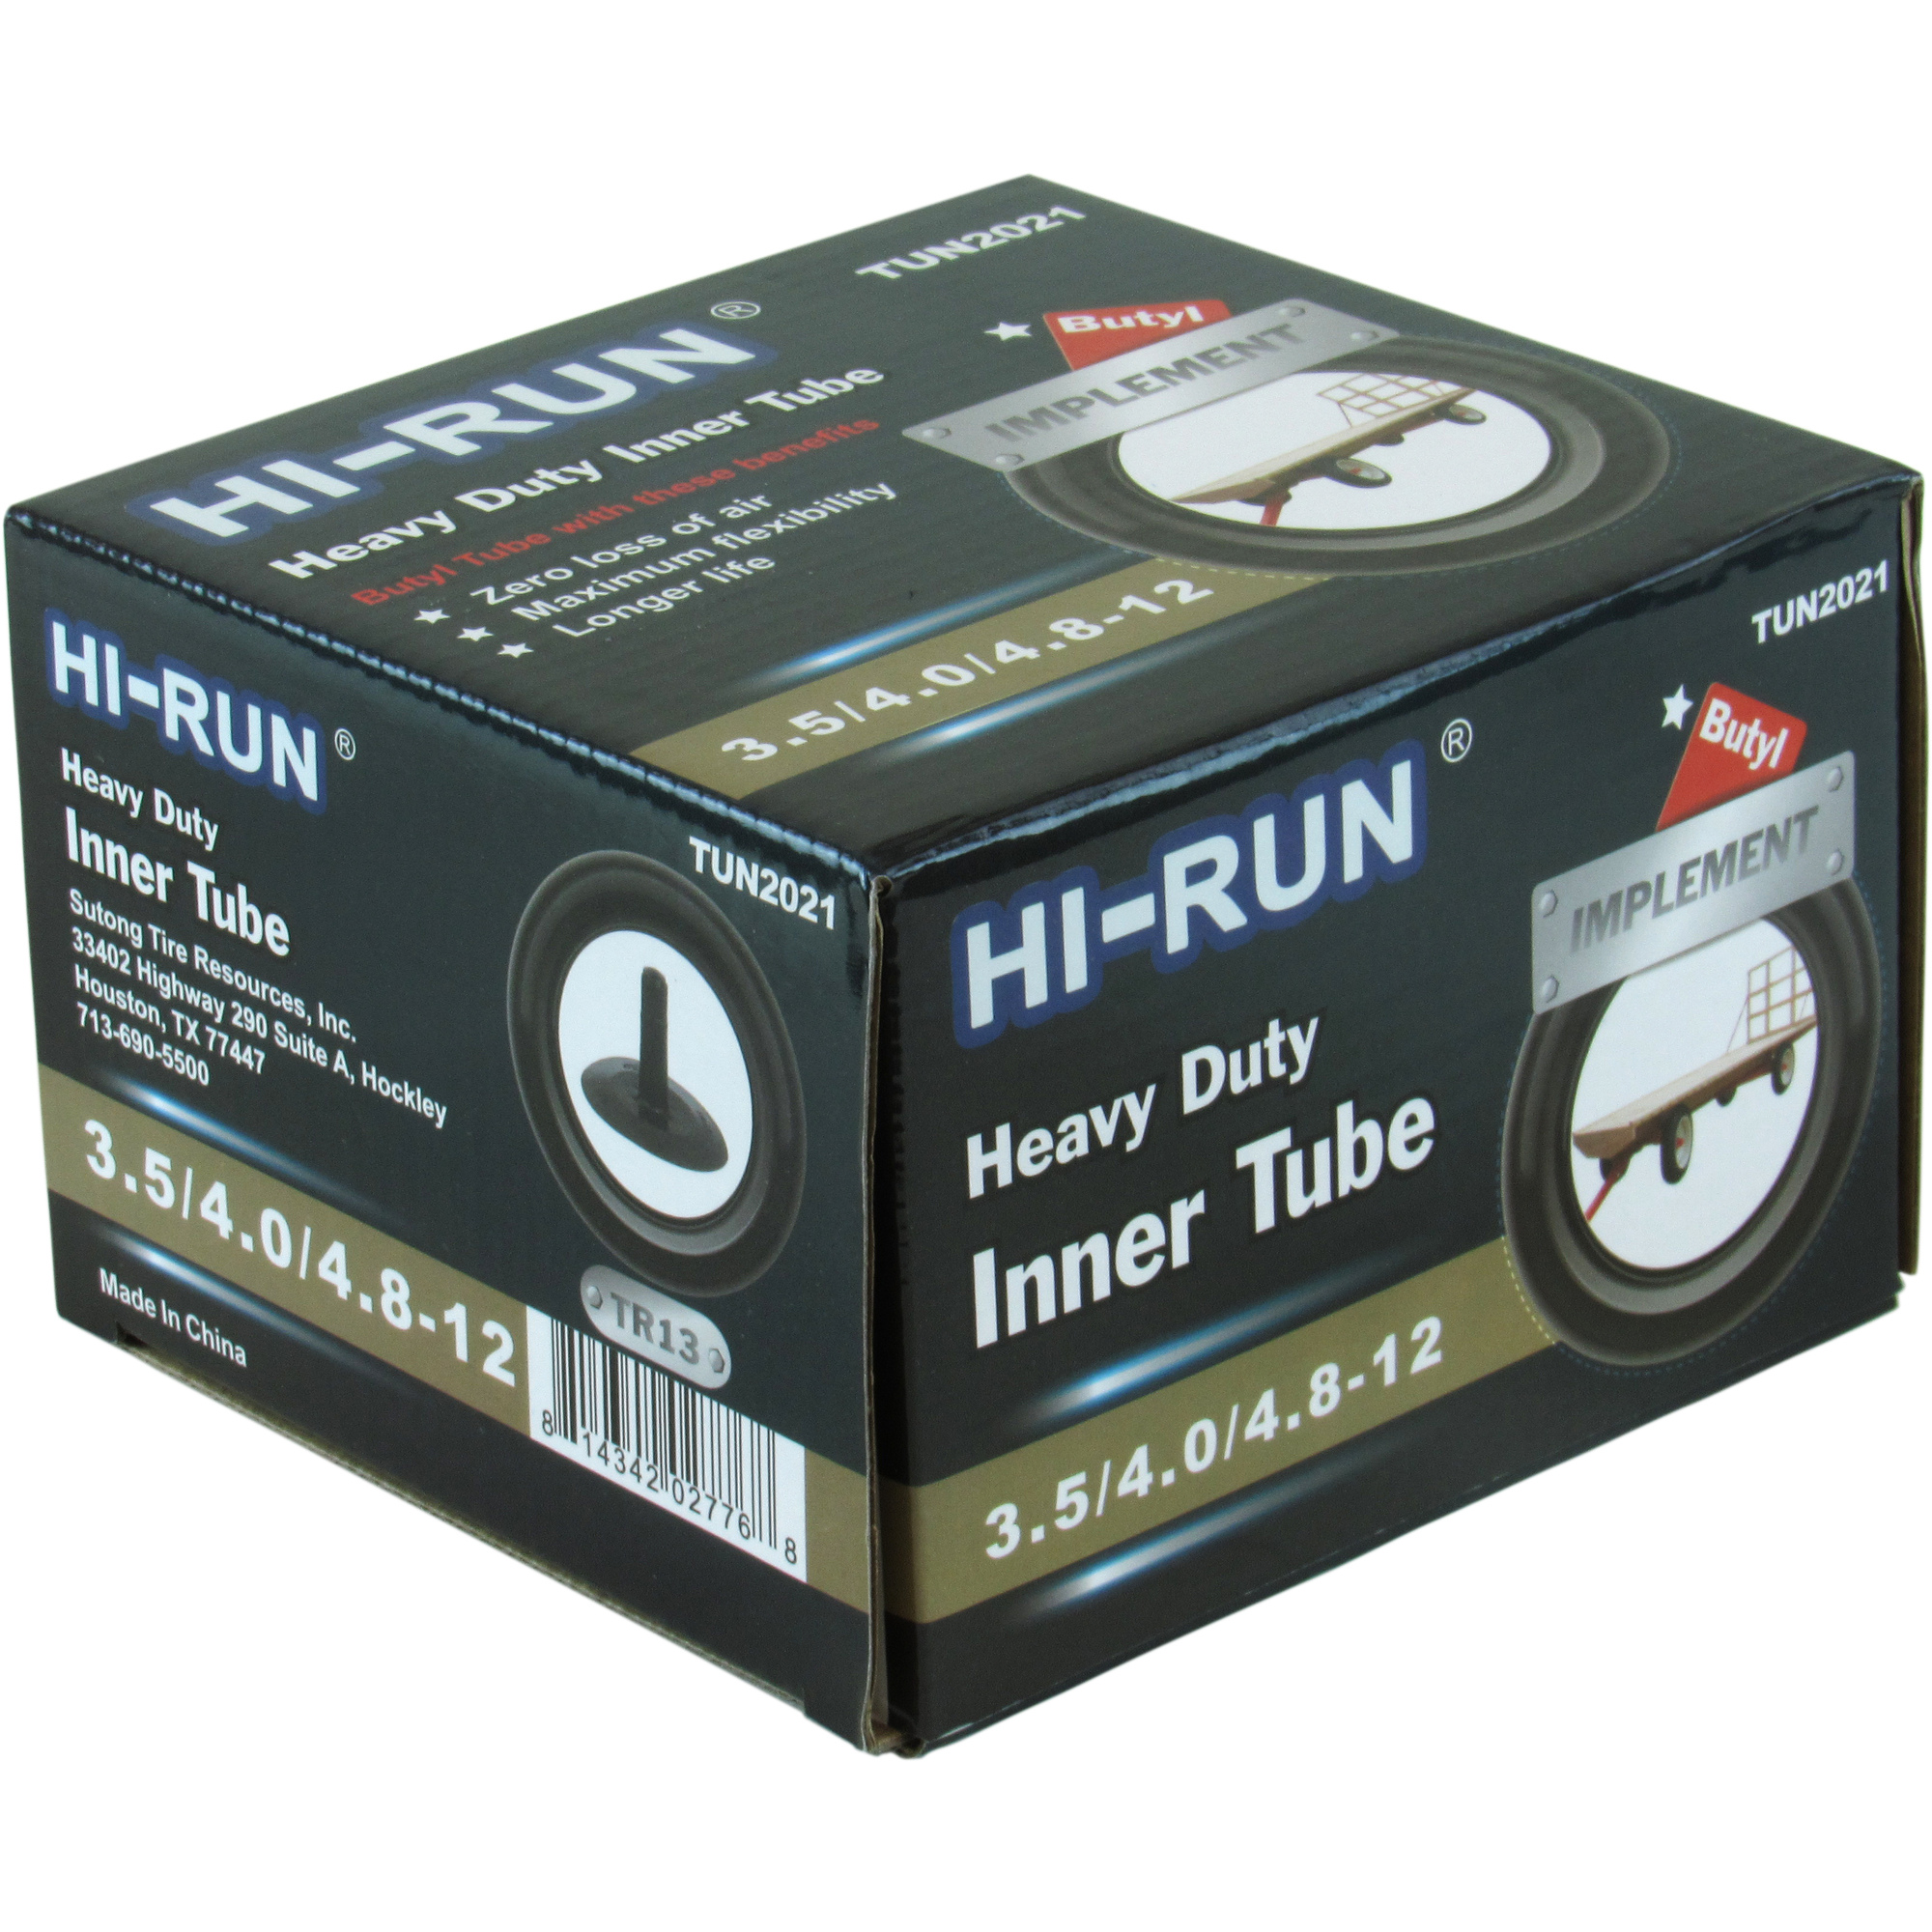 HI-RUN, Tube 3.5/4.0/4.8-12 (TR13) Float Implement, Fits Rim Size 12 in, Included (qty.) 1 Model TUN2021